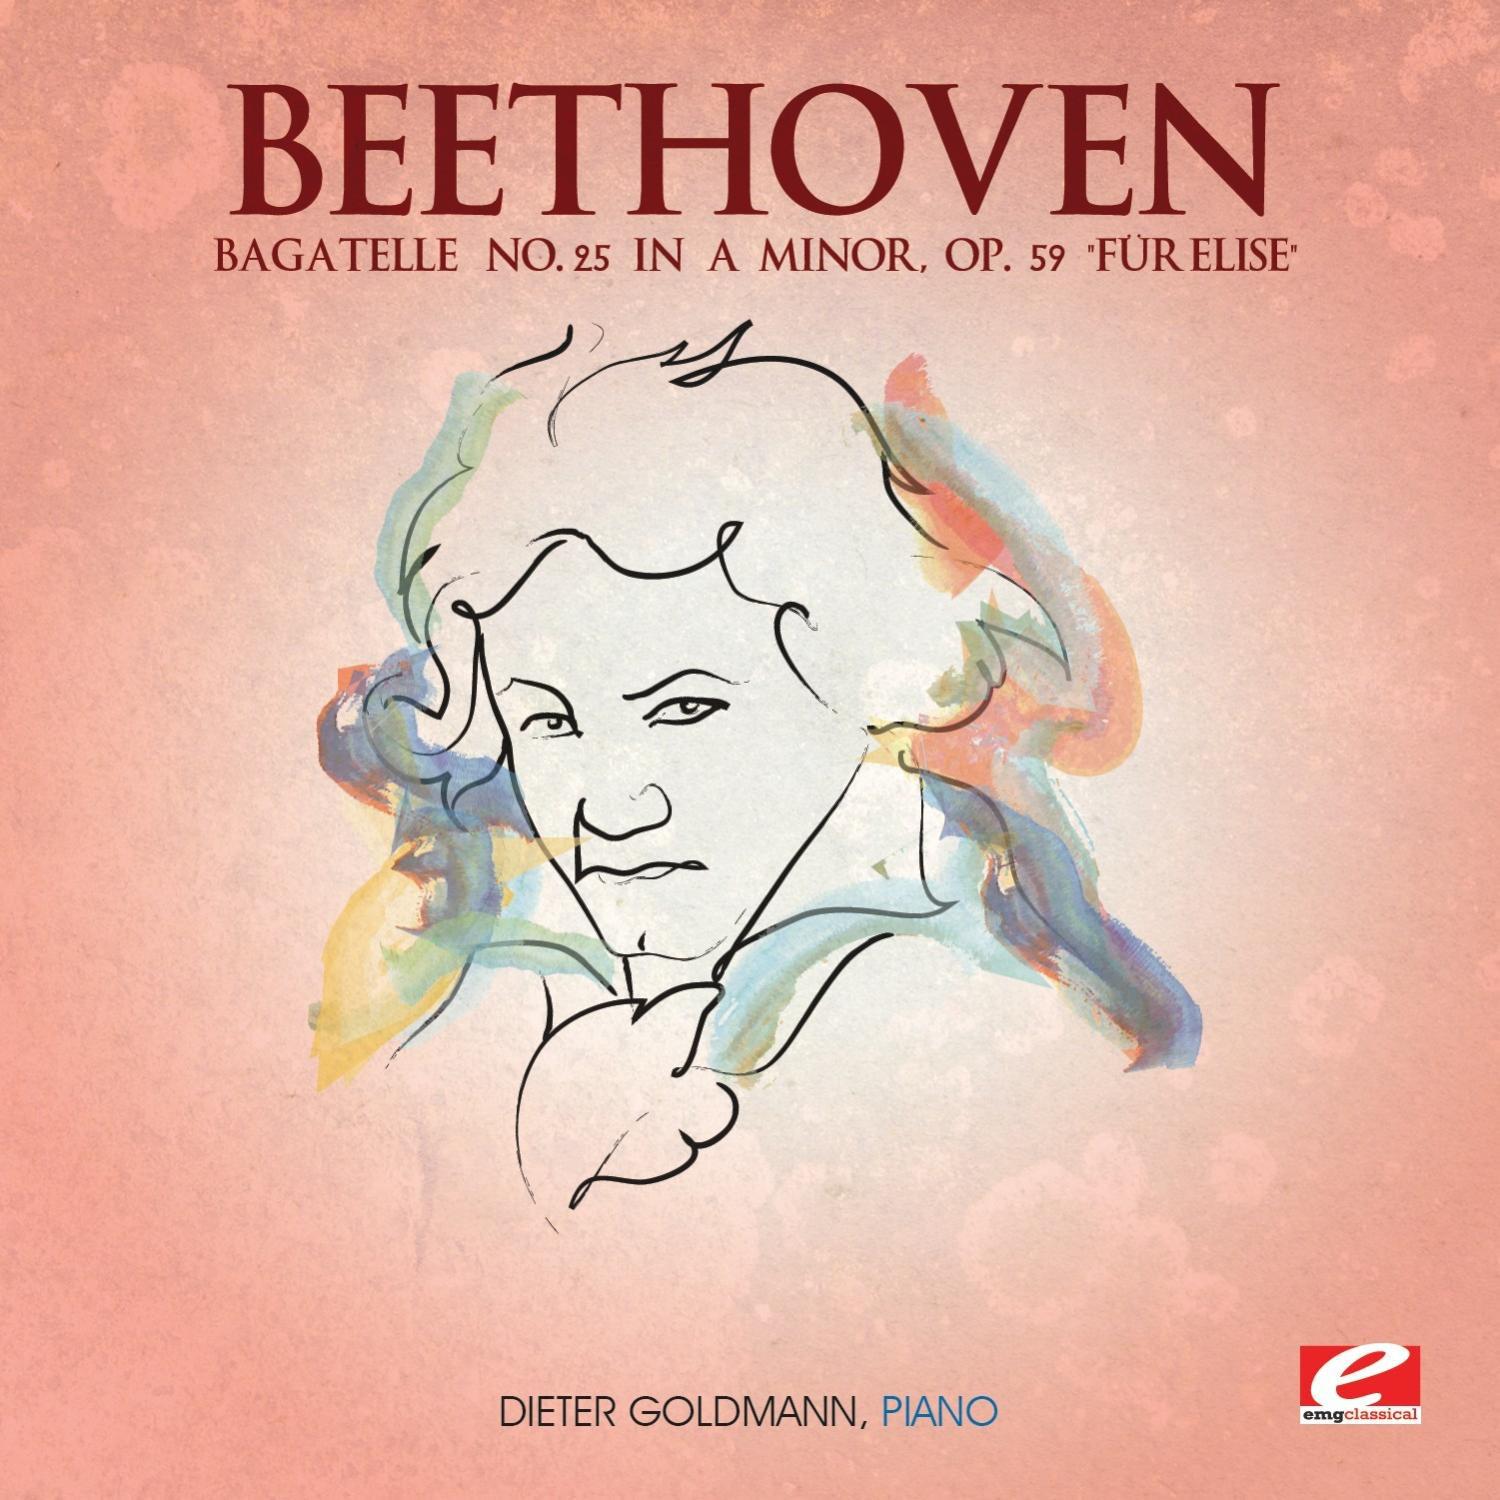 Beethoven: Bagatelle No. 25 in A Minor, Op. 59 " Fü r Elise" Digitally Remastered